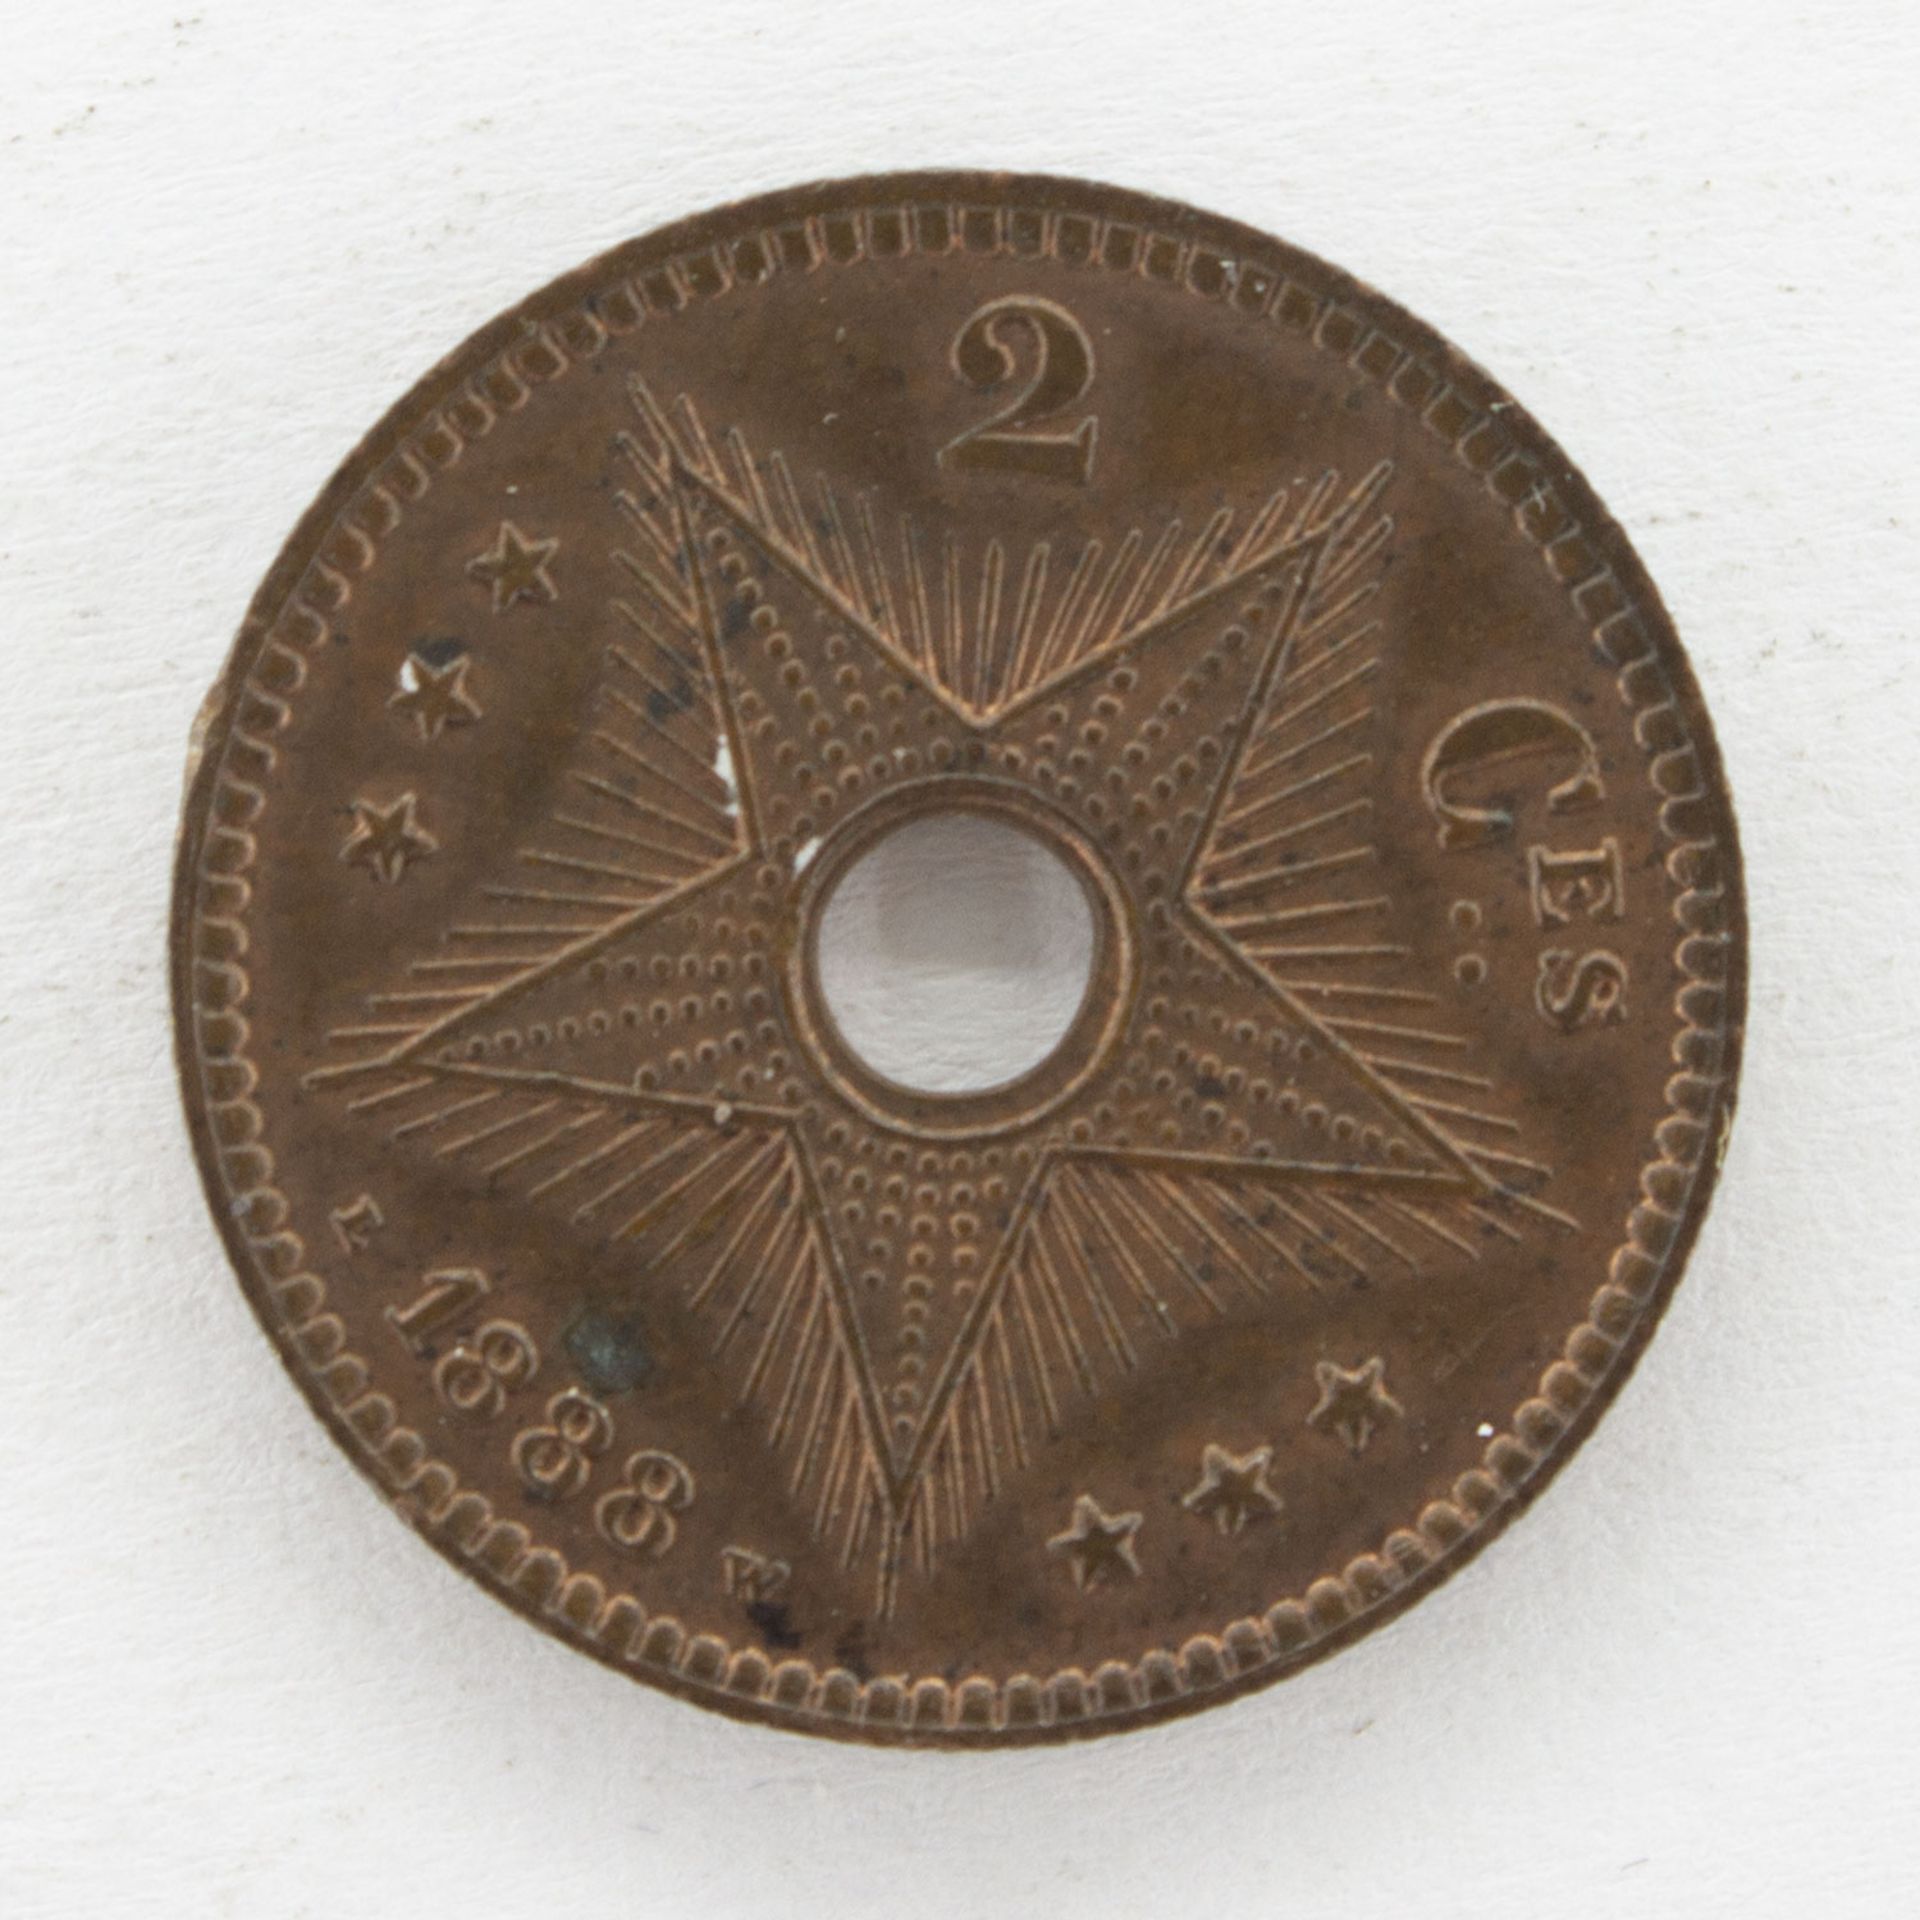 2 Centimes - Image 2 of 2